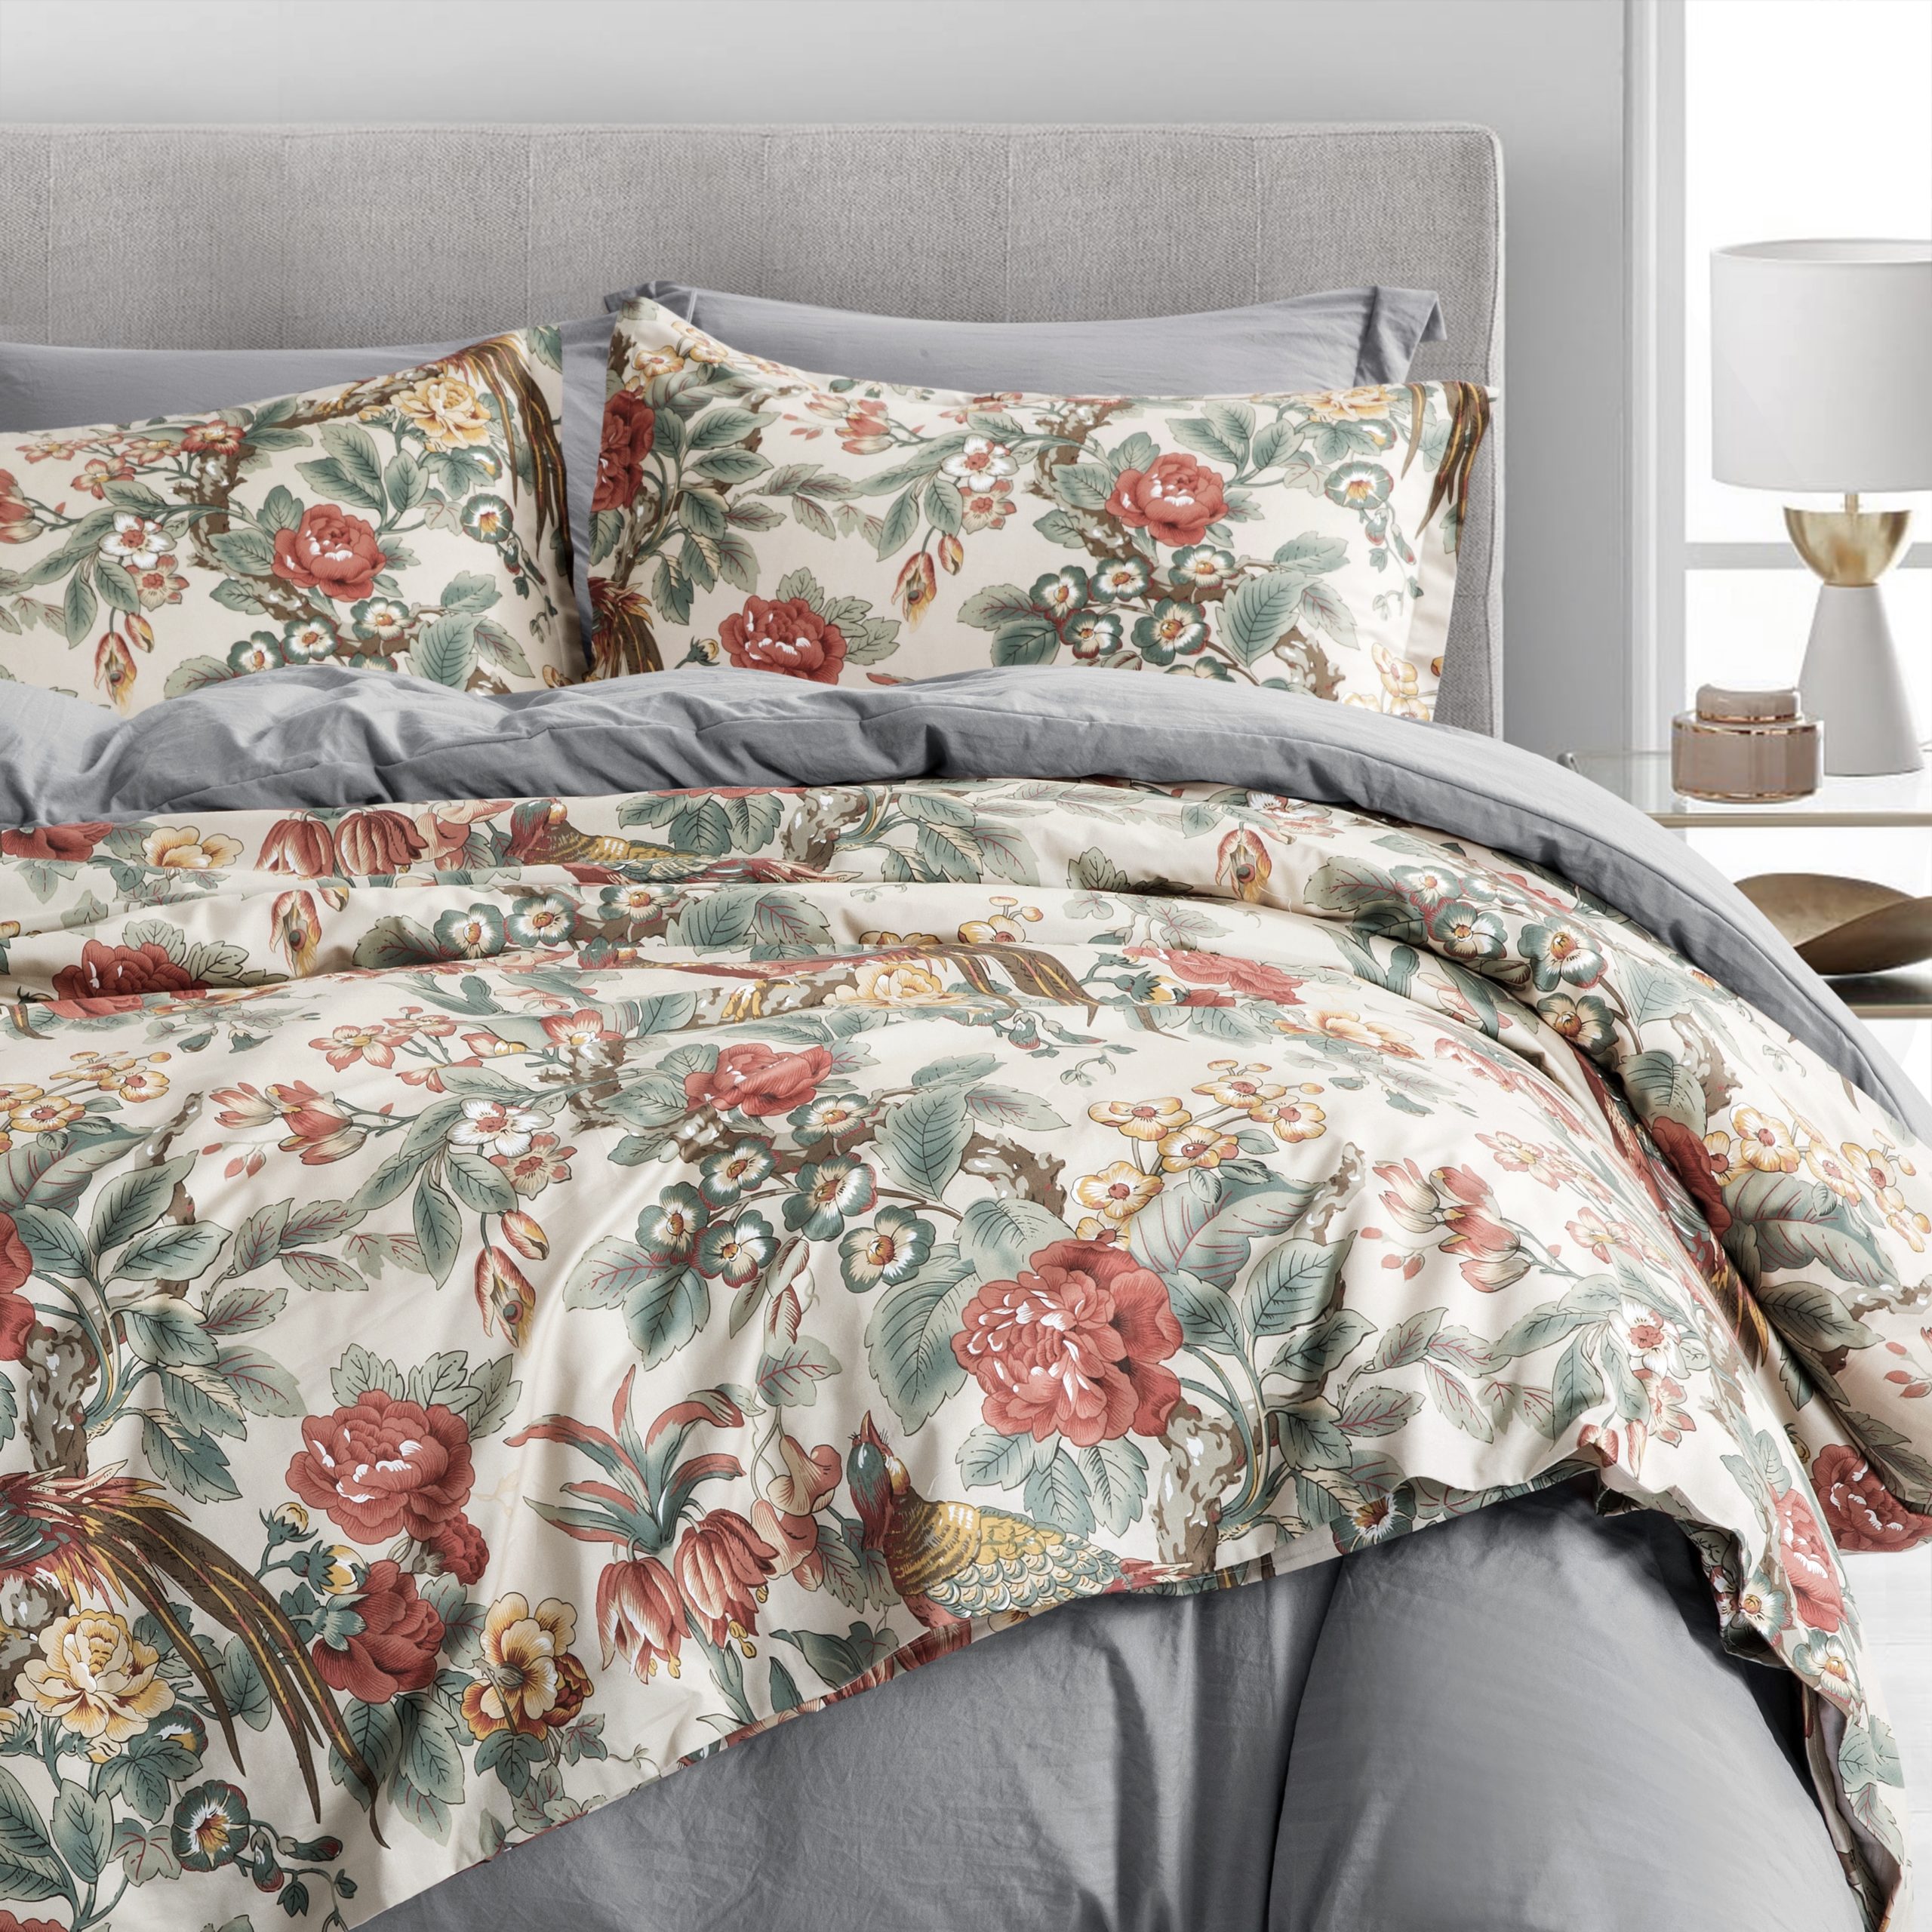 Chinoiserie Chic Peacock Floral Duvet Cover Paradise Garden Botanical Bird  and Tree Branches Vintage Bedding Set Autumn Red